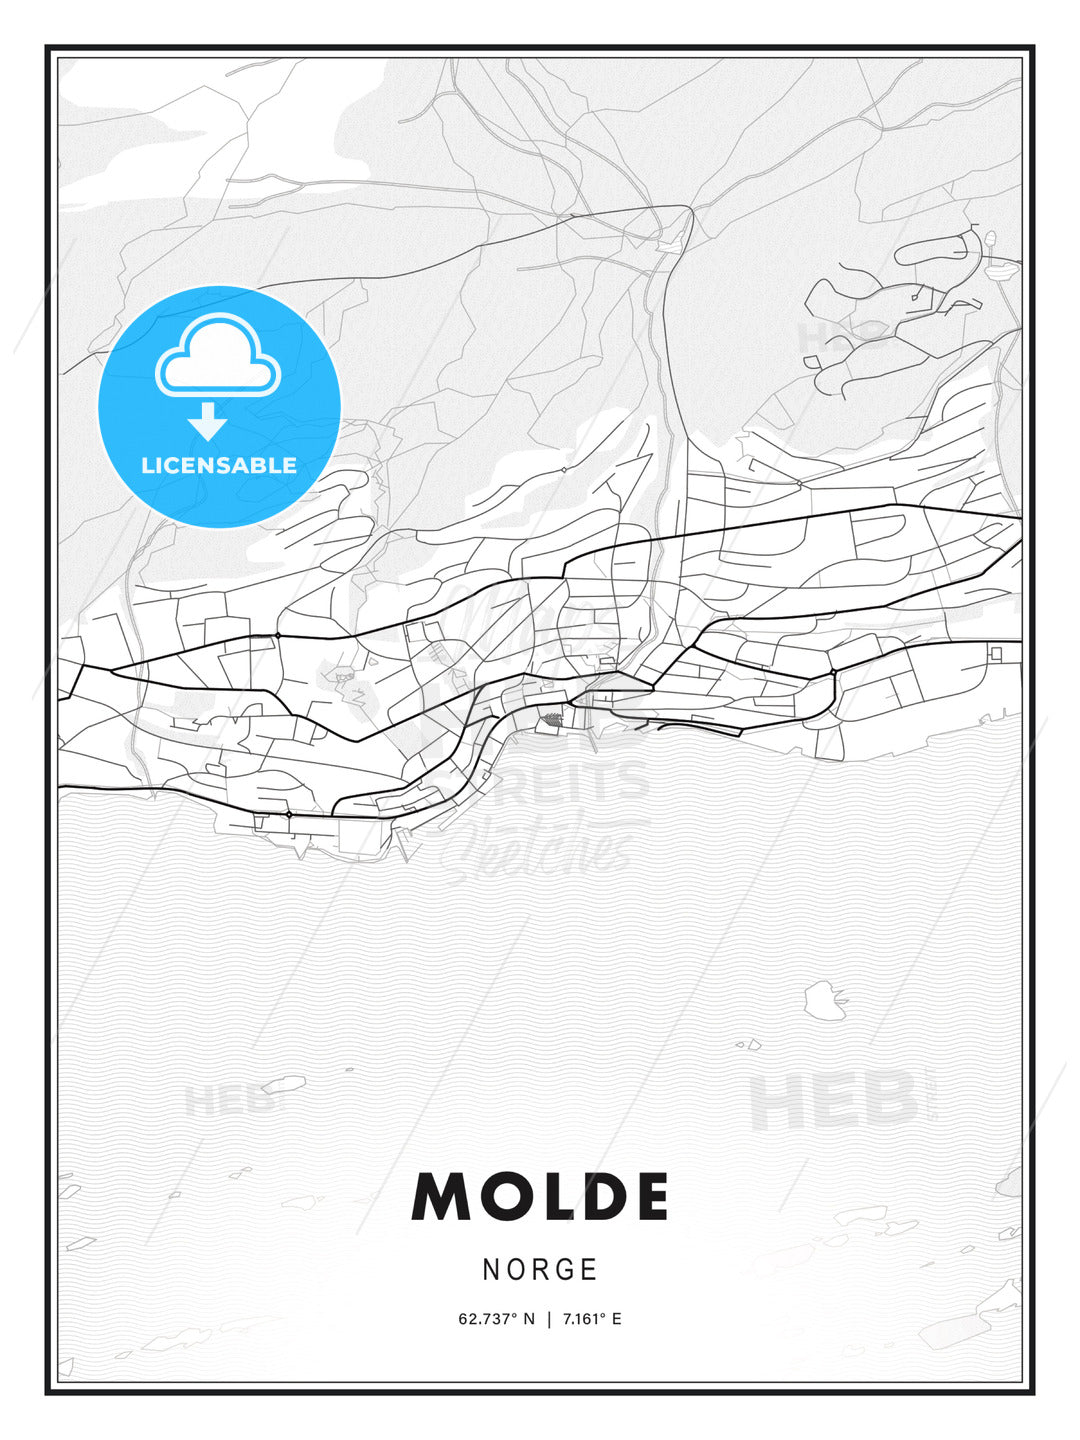 Molde, Norway, Modern Print Template in Various Formats - HEBSTREITS Sketches